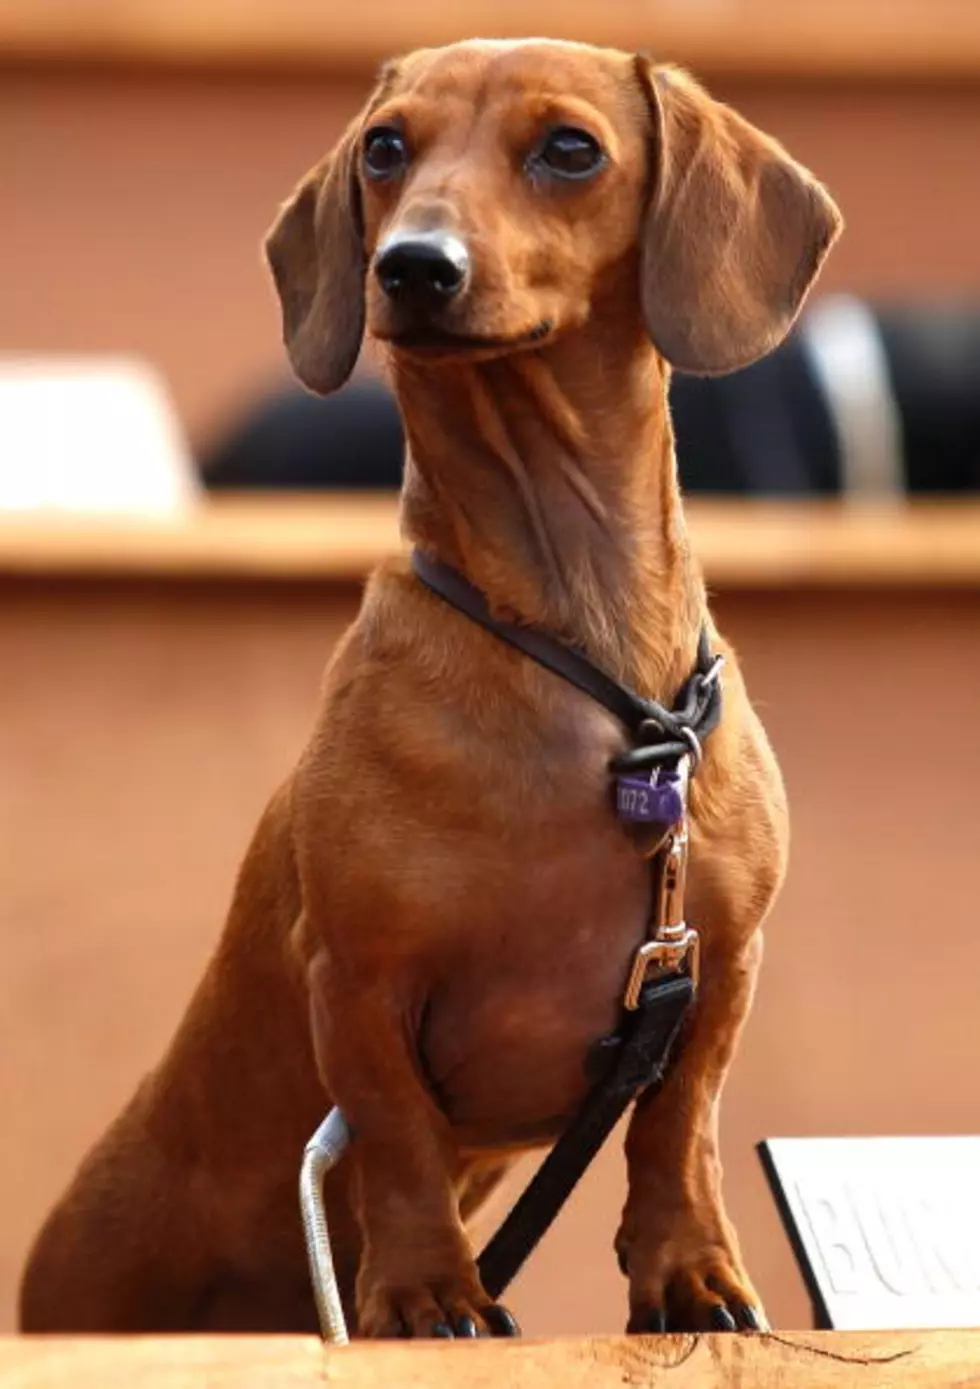 Do You Know What Dachshunds Were Originally Bred For?